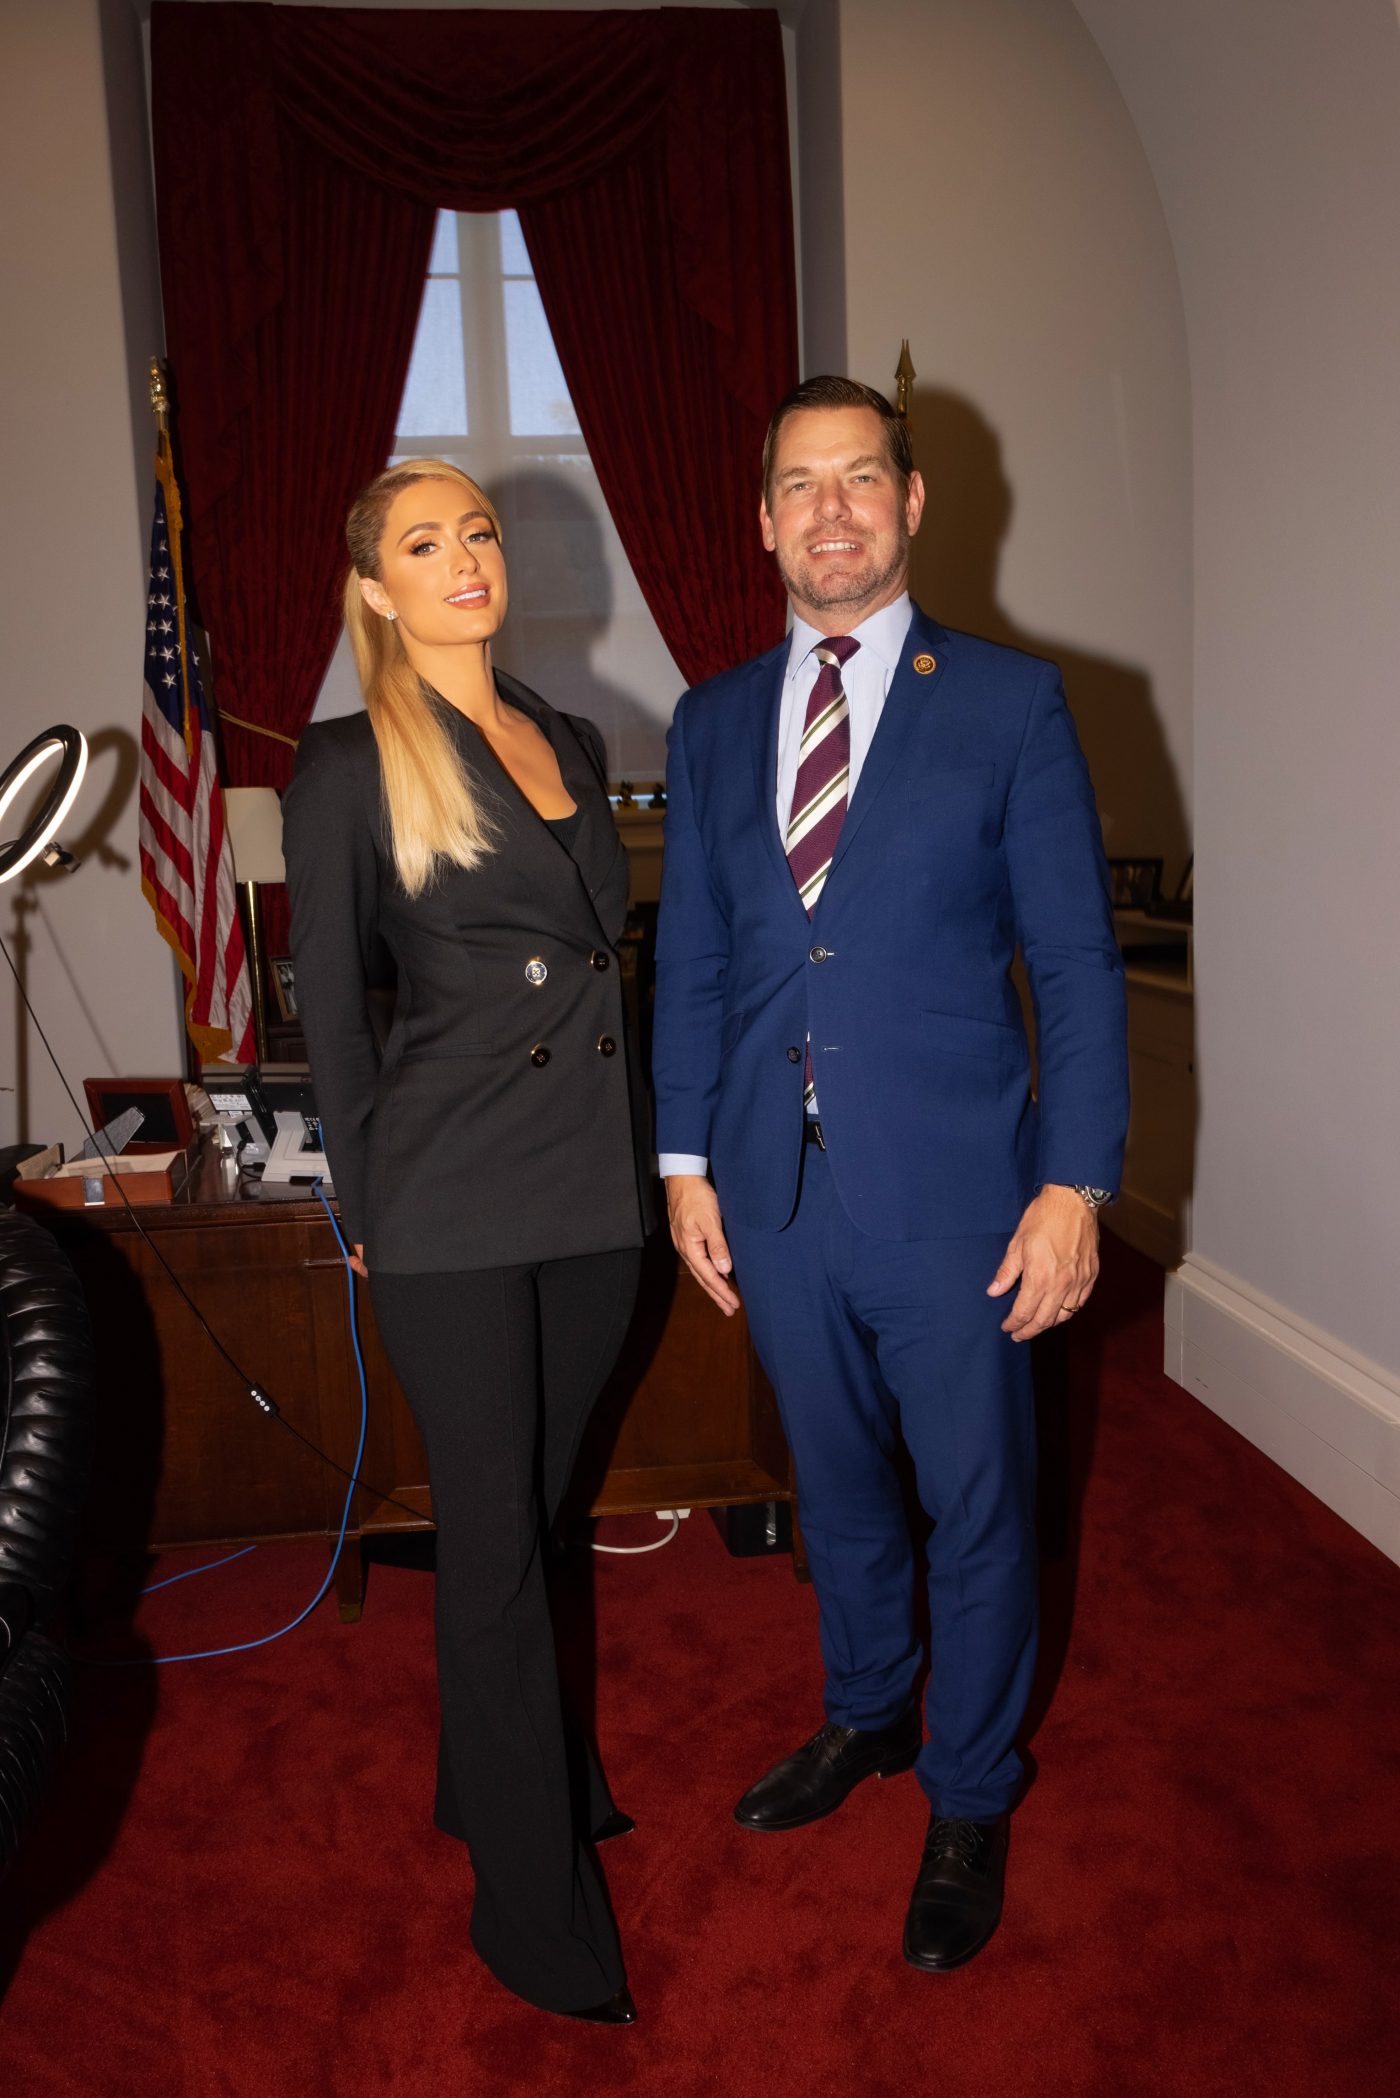 Paris Hilton Goes to Washington to Help End Child Abuse in Congregate Care